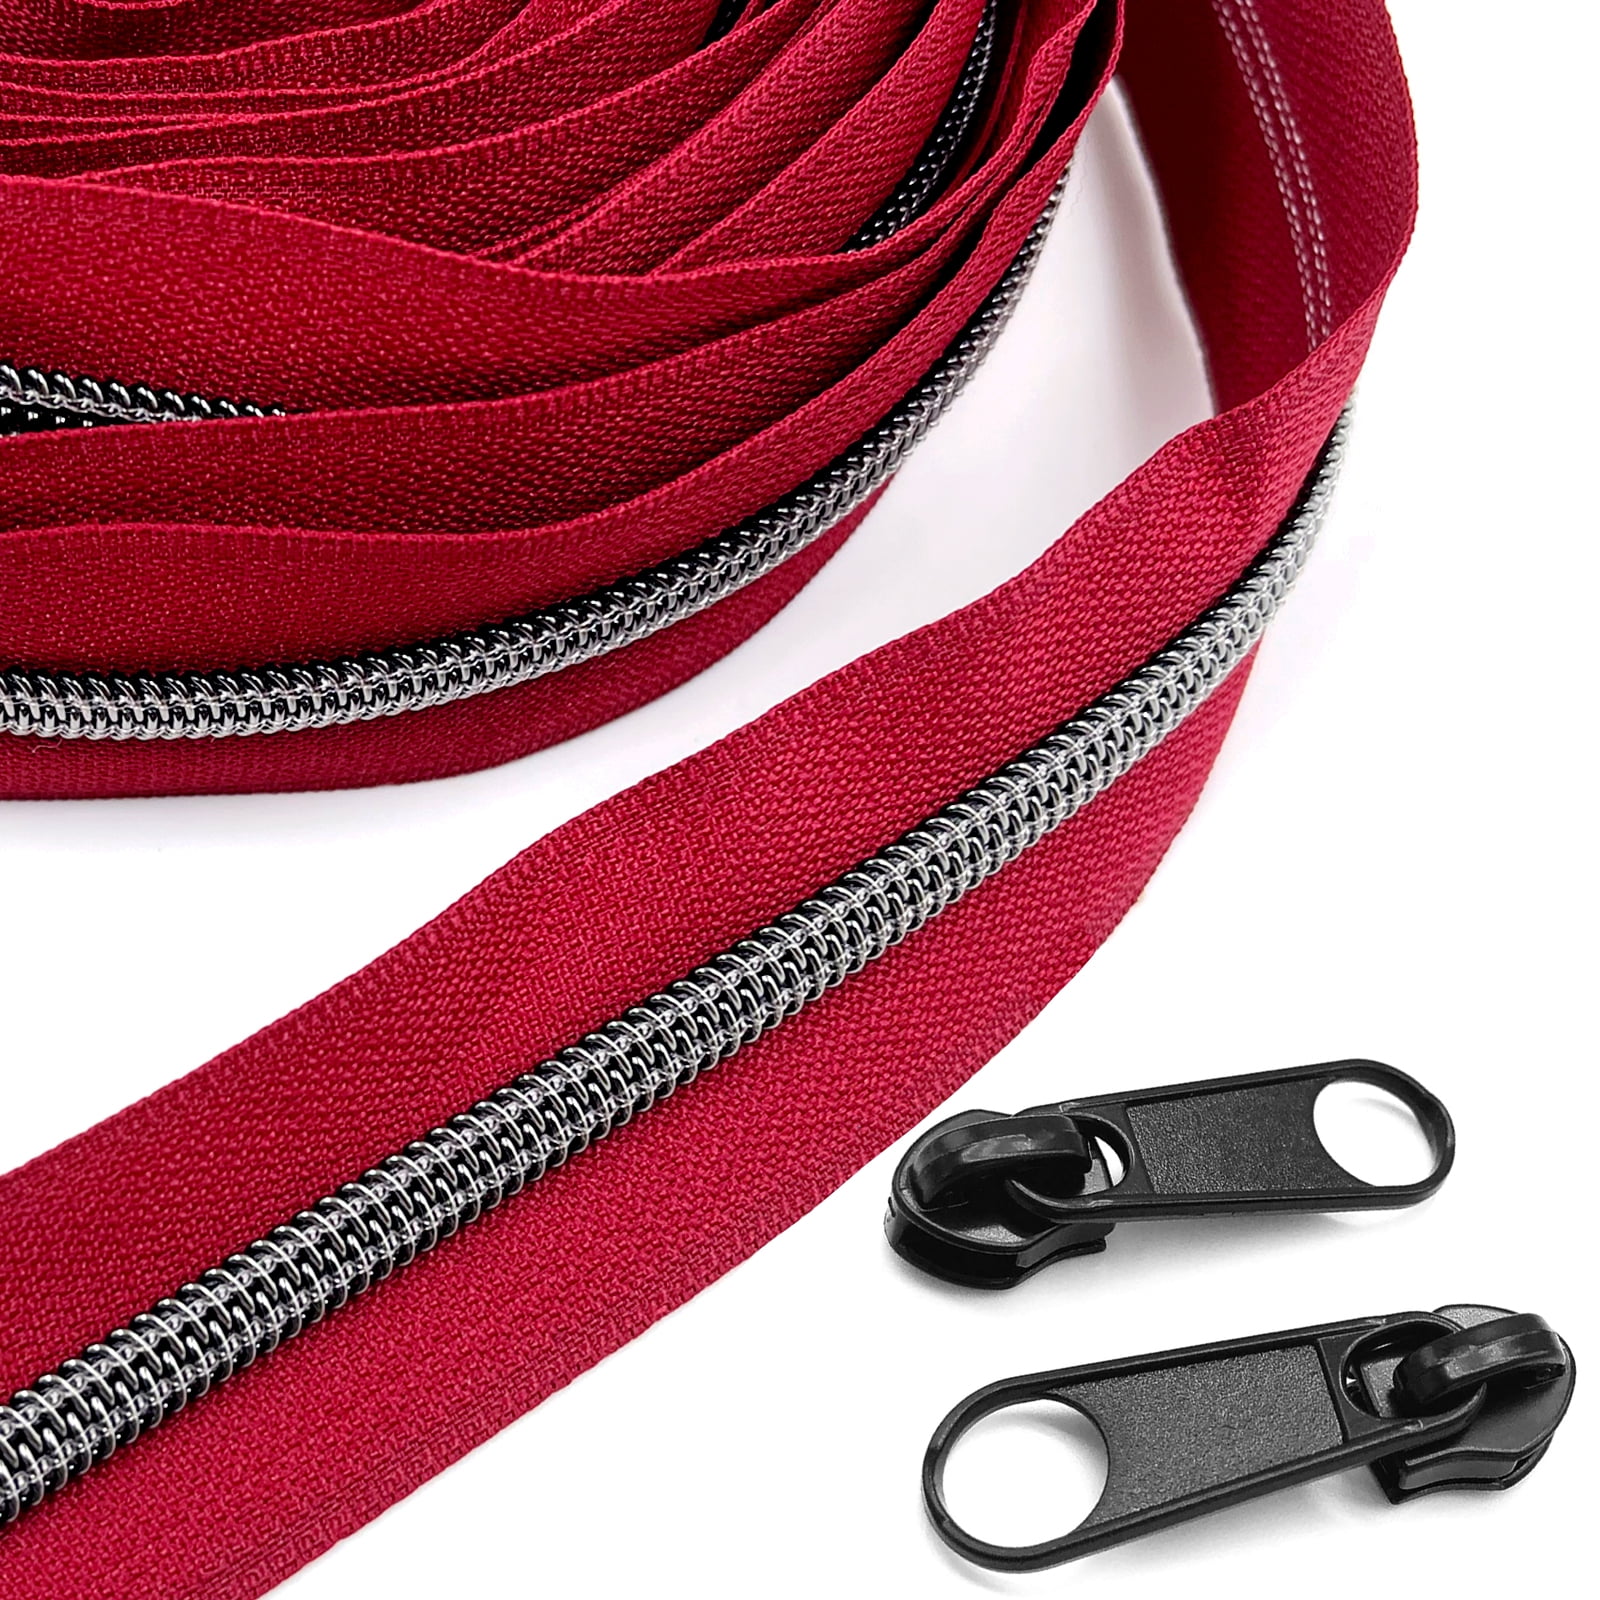 YIXI-SBest Nylon Zippers #5 10 Yards Sewing Zippers Bulk DIY Zipper by The Yard Bulk with 20pcs Slider-Long Zippers for Tailor Sewing Crafts Bag